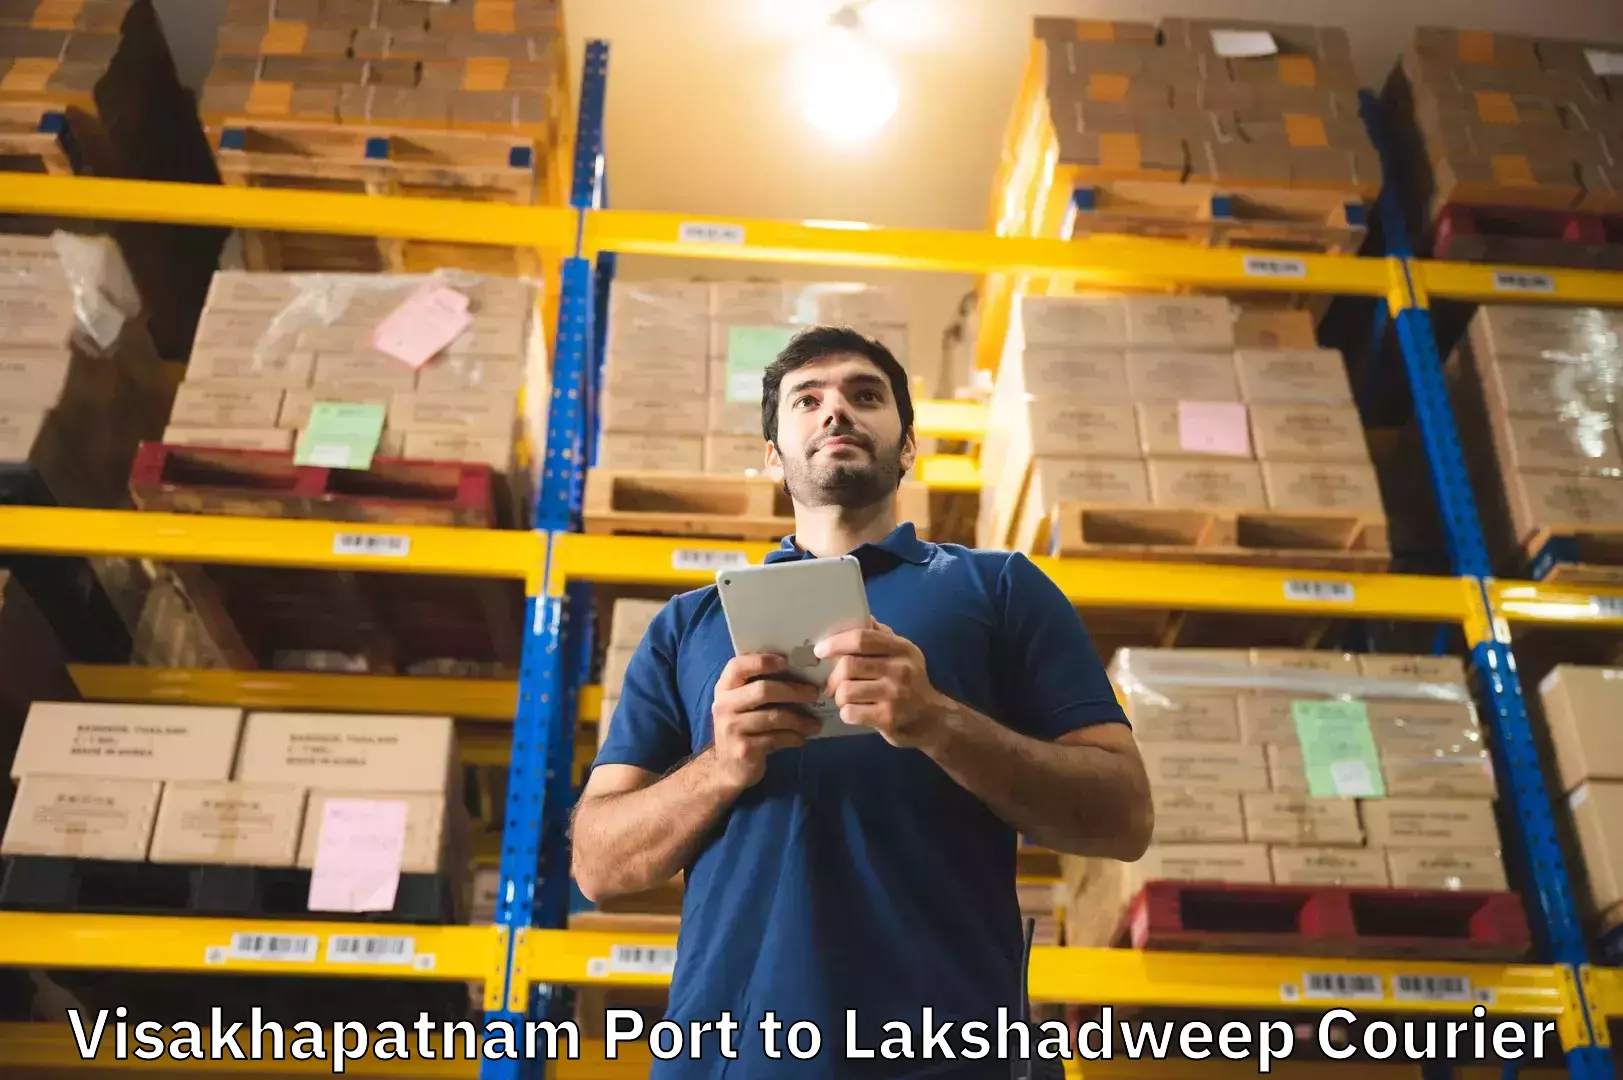 Luggage transport operations in Visakhapatnam Port to Lakshadweep